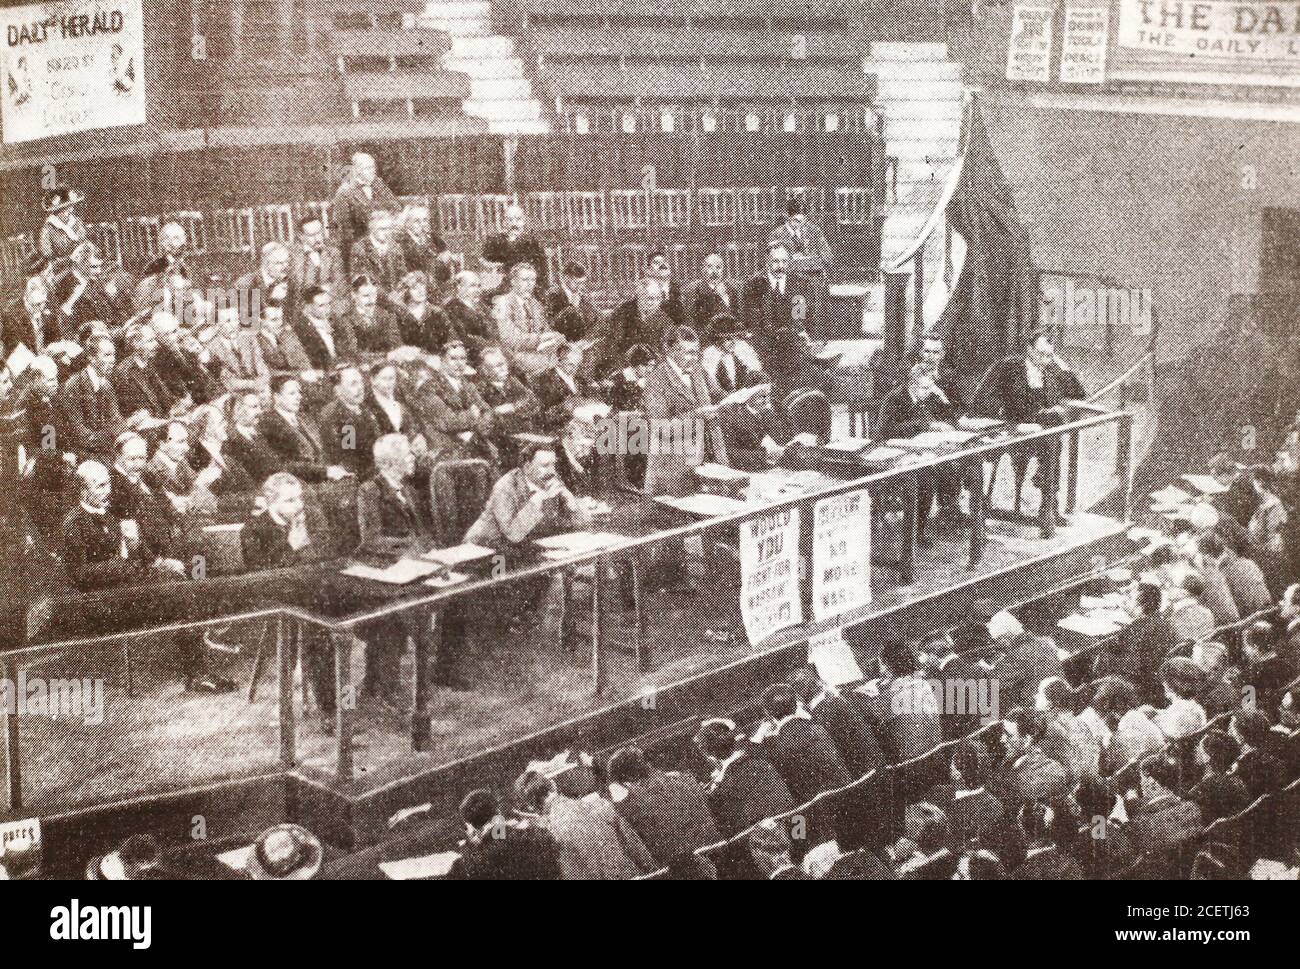 Conference on August 9, 1920, which created the National Action Council. The National Council of Action was an organisation established on 5 August 1920 by the Labour movement in the United Kingdom to forestall the involvement of the British Empire in another war in 1920. Ernest Bevin had heard that the Royal Navy had dispatched ships to Helsingfors and the Black Sea equipped for war. Bevin arranged a meeting with Charles Bowerman and Arthur Henderson in order to establish a Council of Action. Fred Bramley, Jim Middleton and H. S. Lindsay were appointed as joint secretaries. Stock Photo